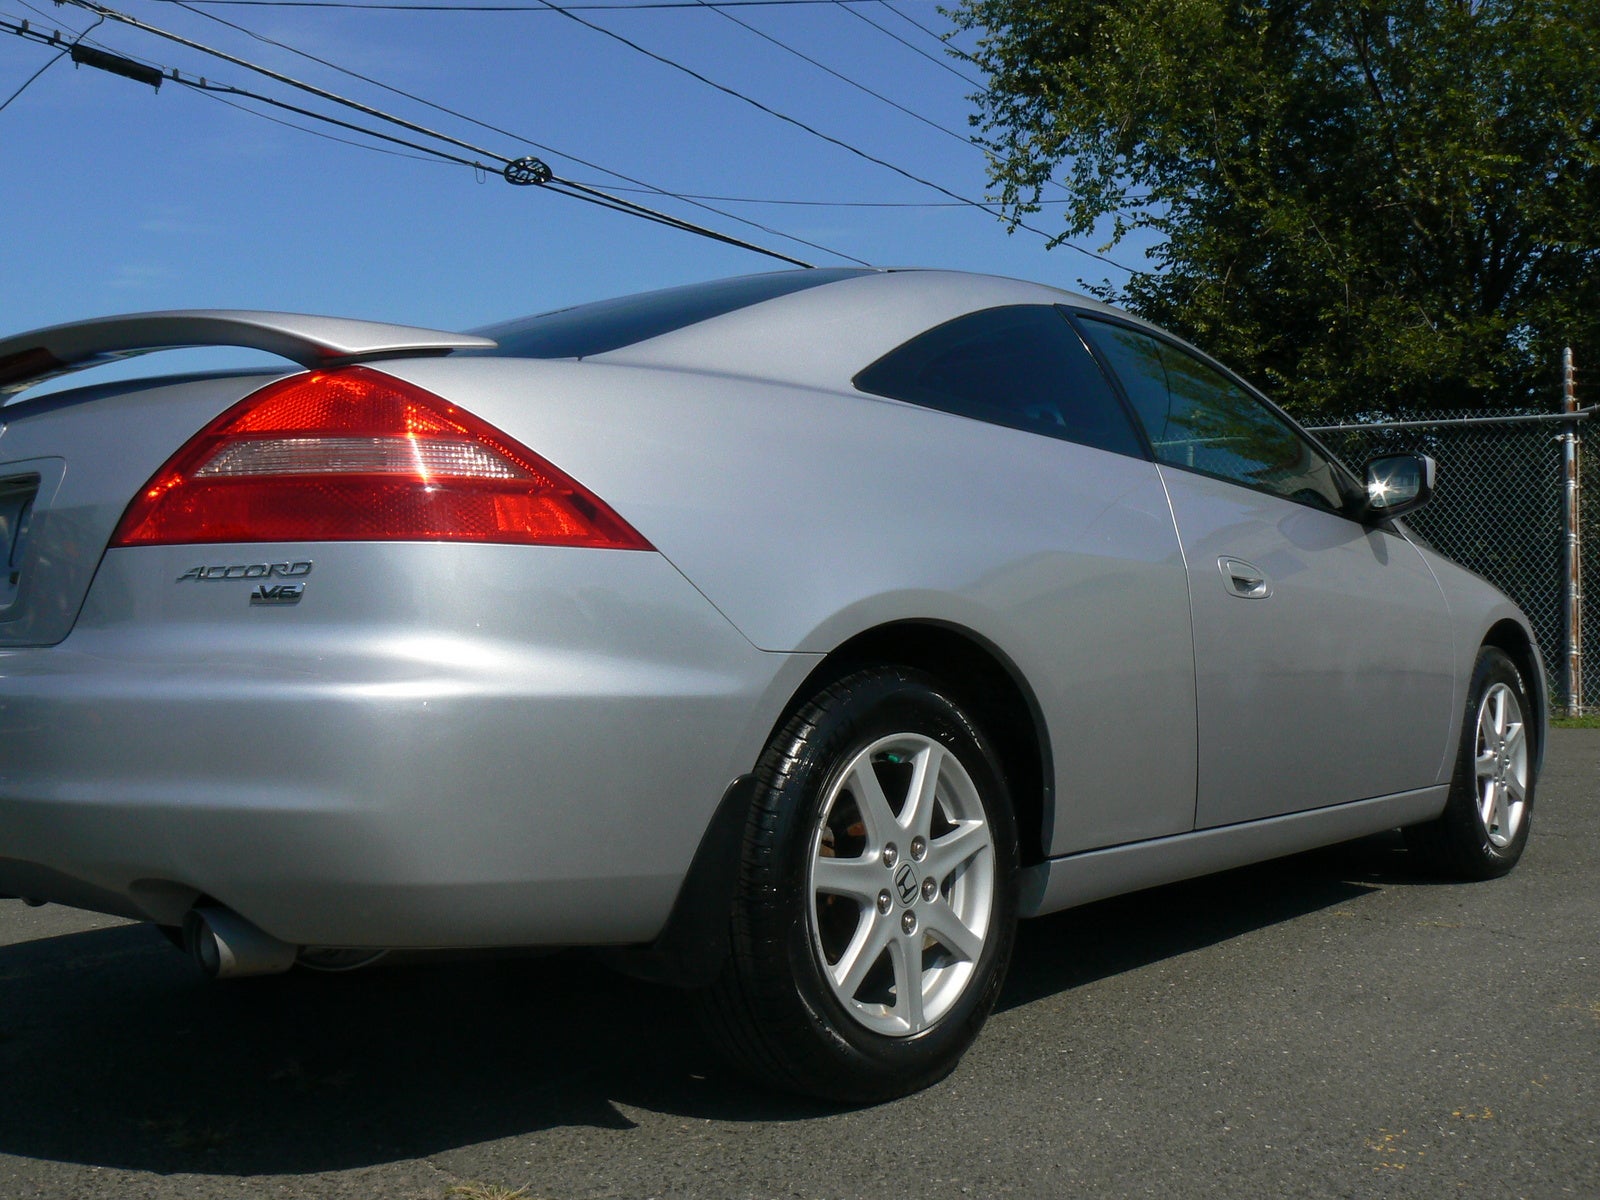 2003 Honda accord ex coupe review #1